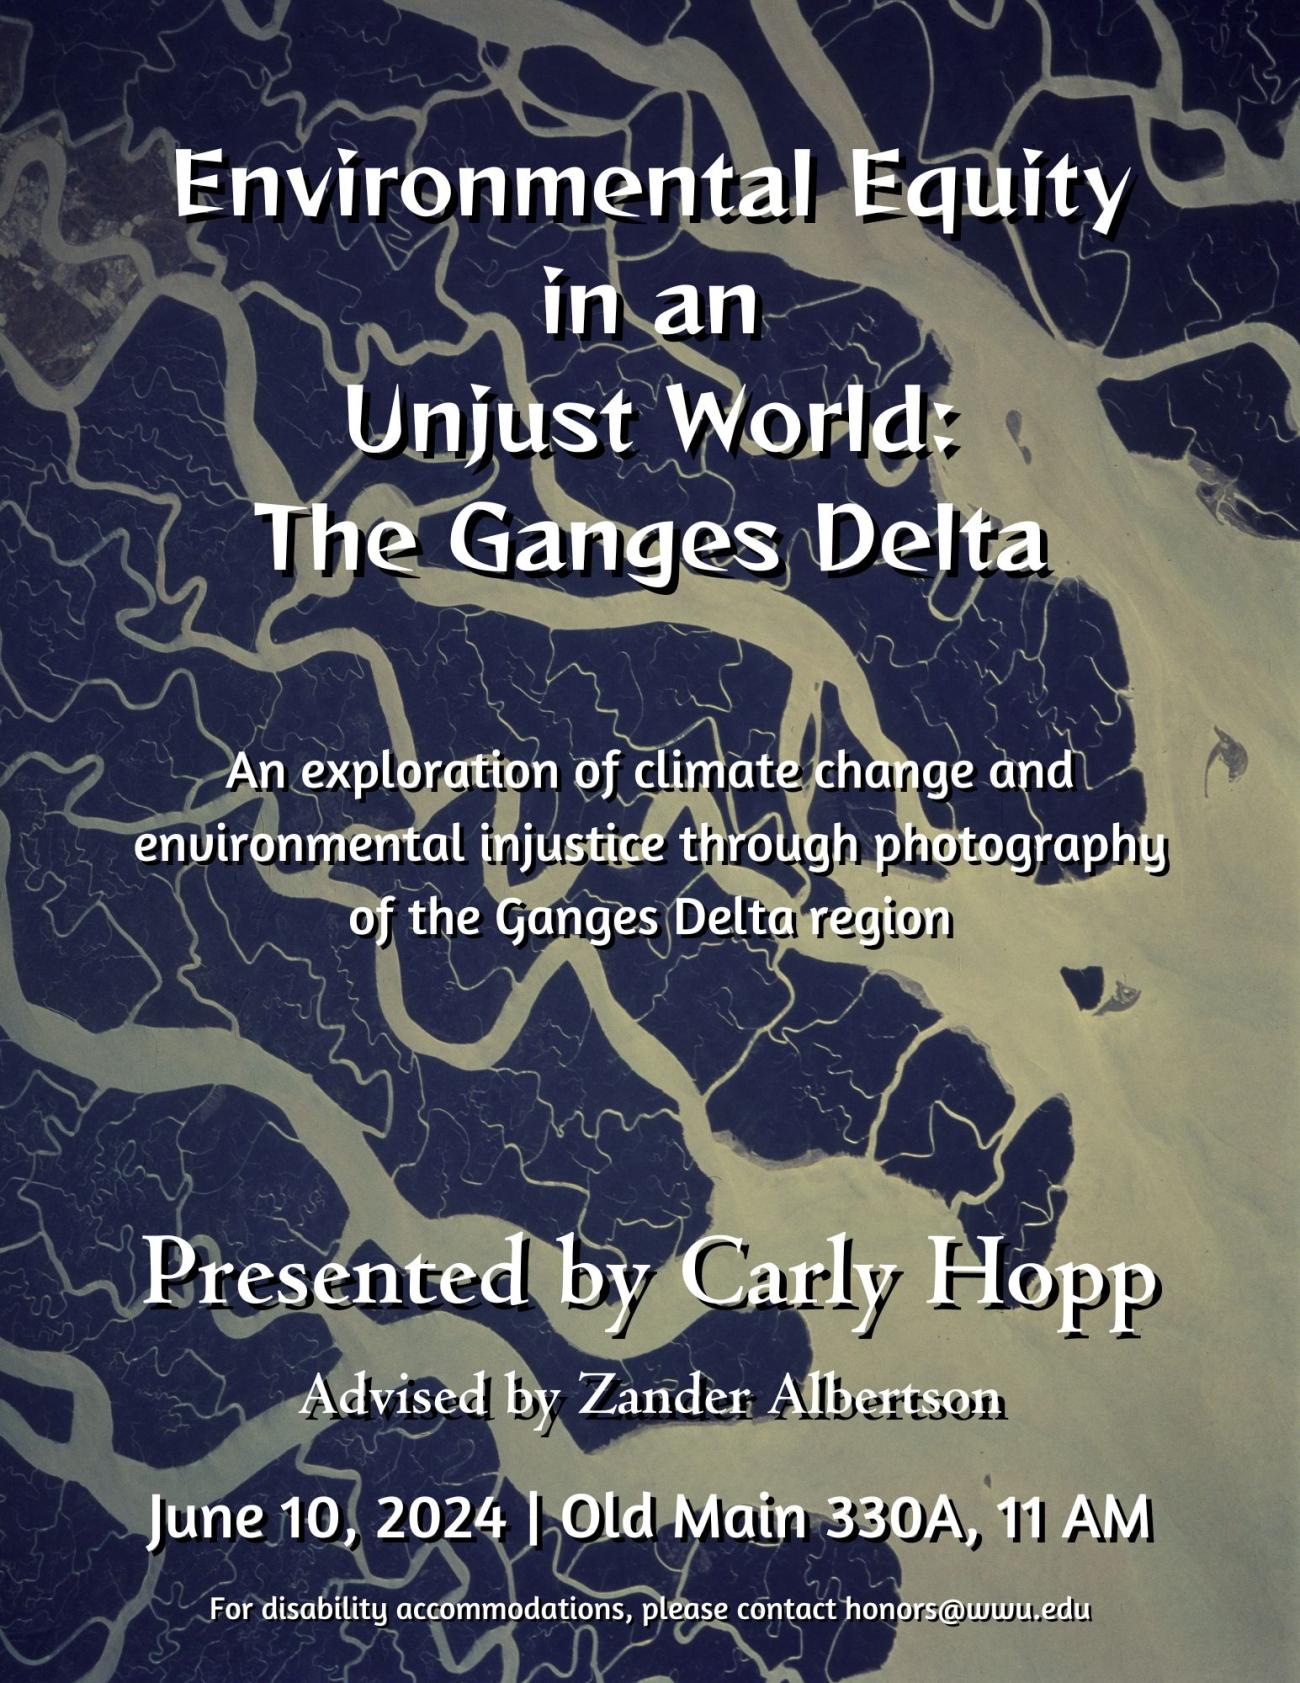 A poster with a background image from NASA of the Ganges River Delta. The text reads “Environmental Equity in an Unjust World: The Ganges Delta. An exploration of climate change and environmental injustice through photography of the Ganges Delta region. Presented by Carly Hopp. Advised by Zander Albertson. June 10, 2024 | Old Main 330A, 11 AM. For disability accommodations, please email honors@wwu.edu”